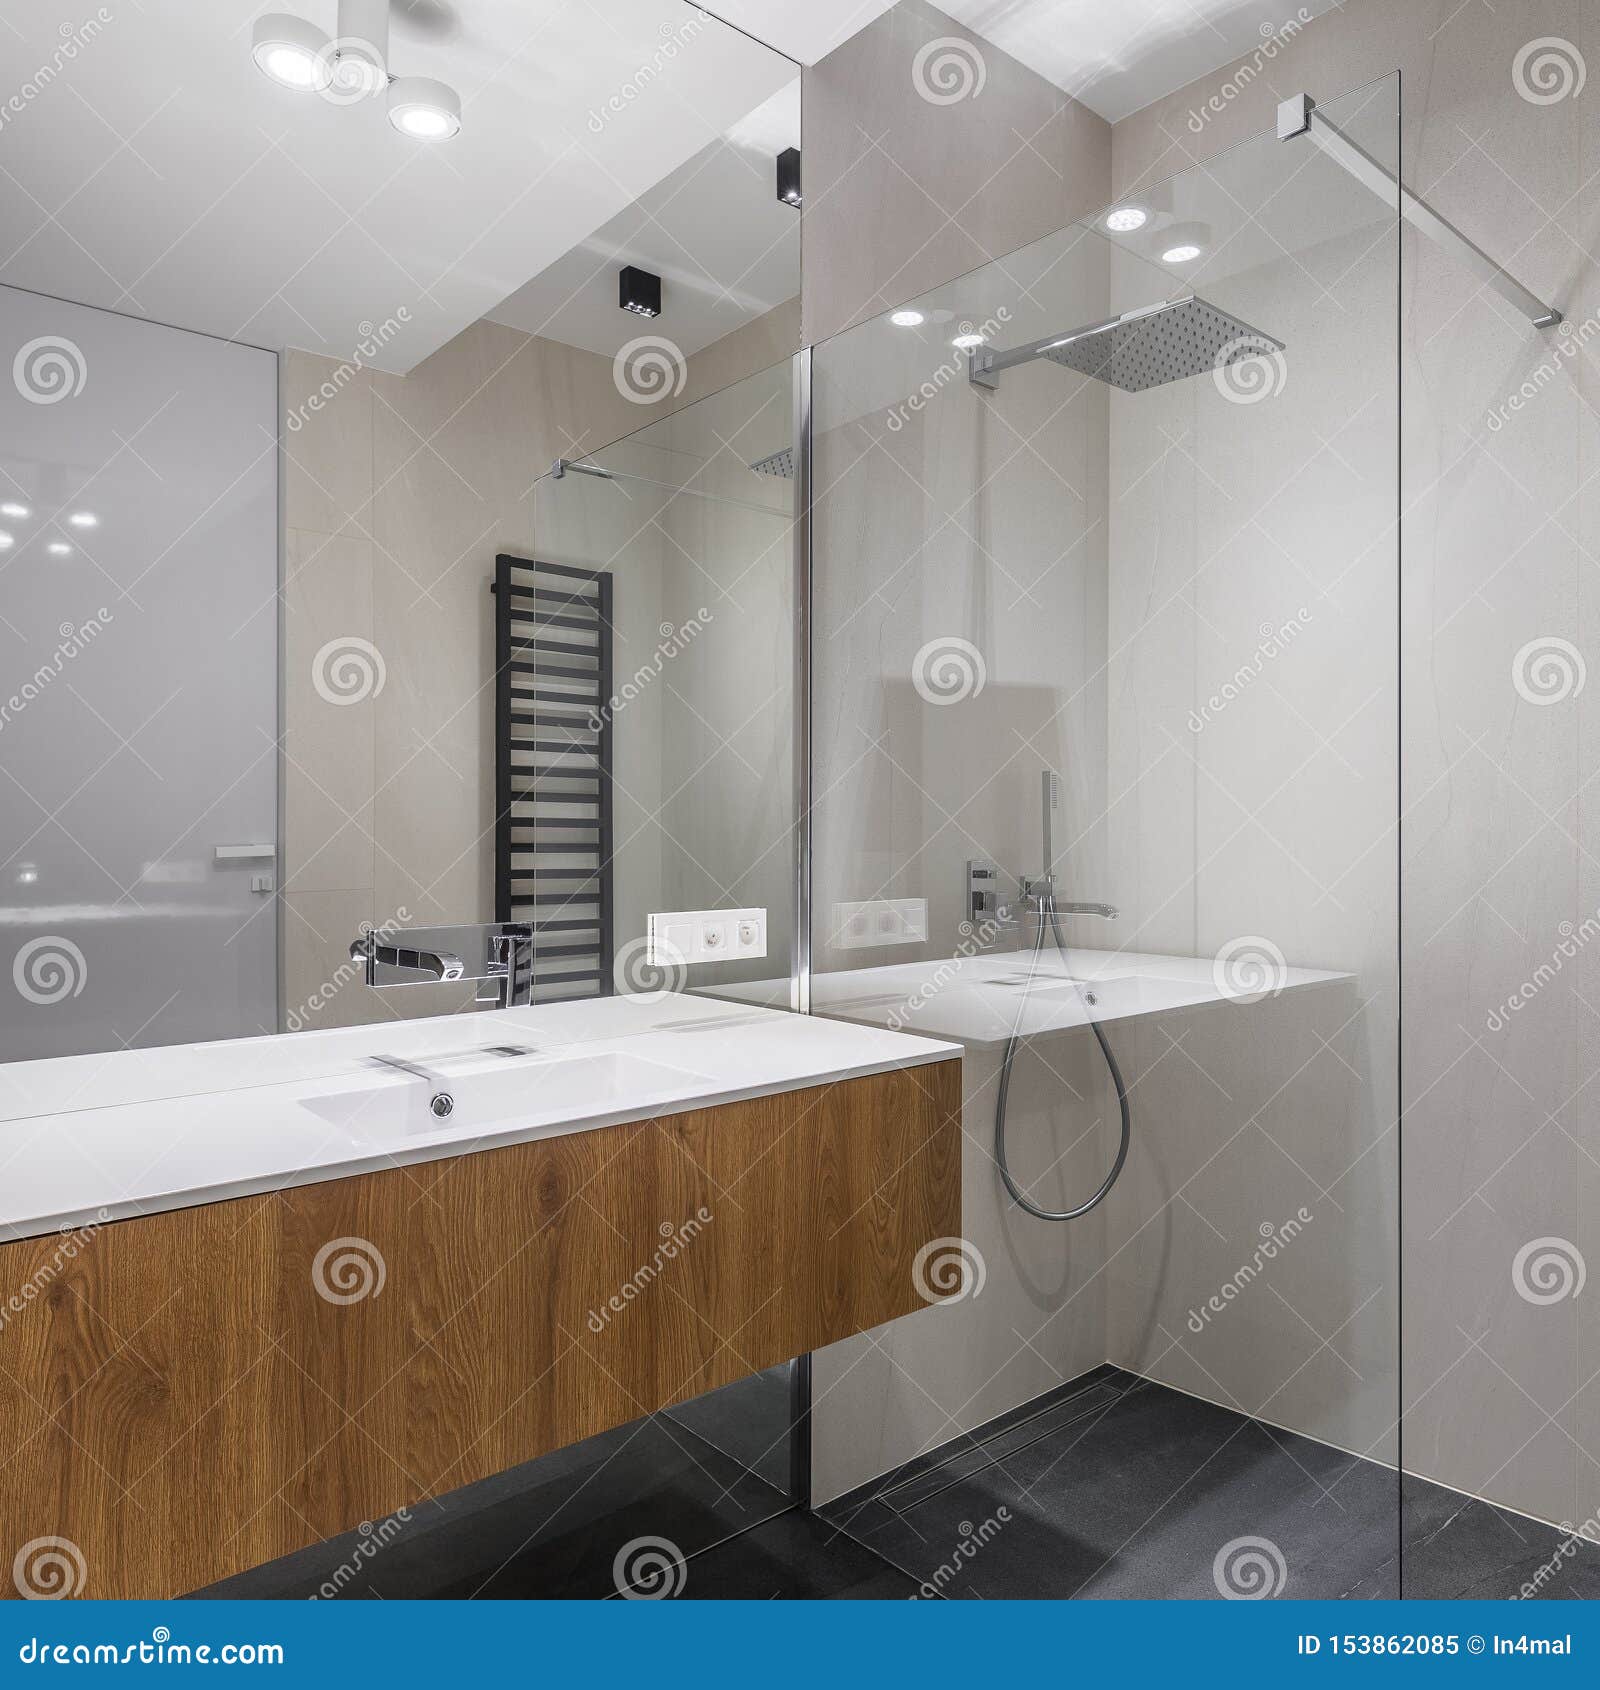 Modern Bathroom With Basin Cabinet Stock Image Image Of Home